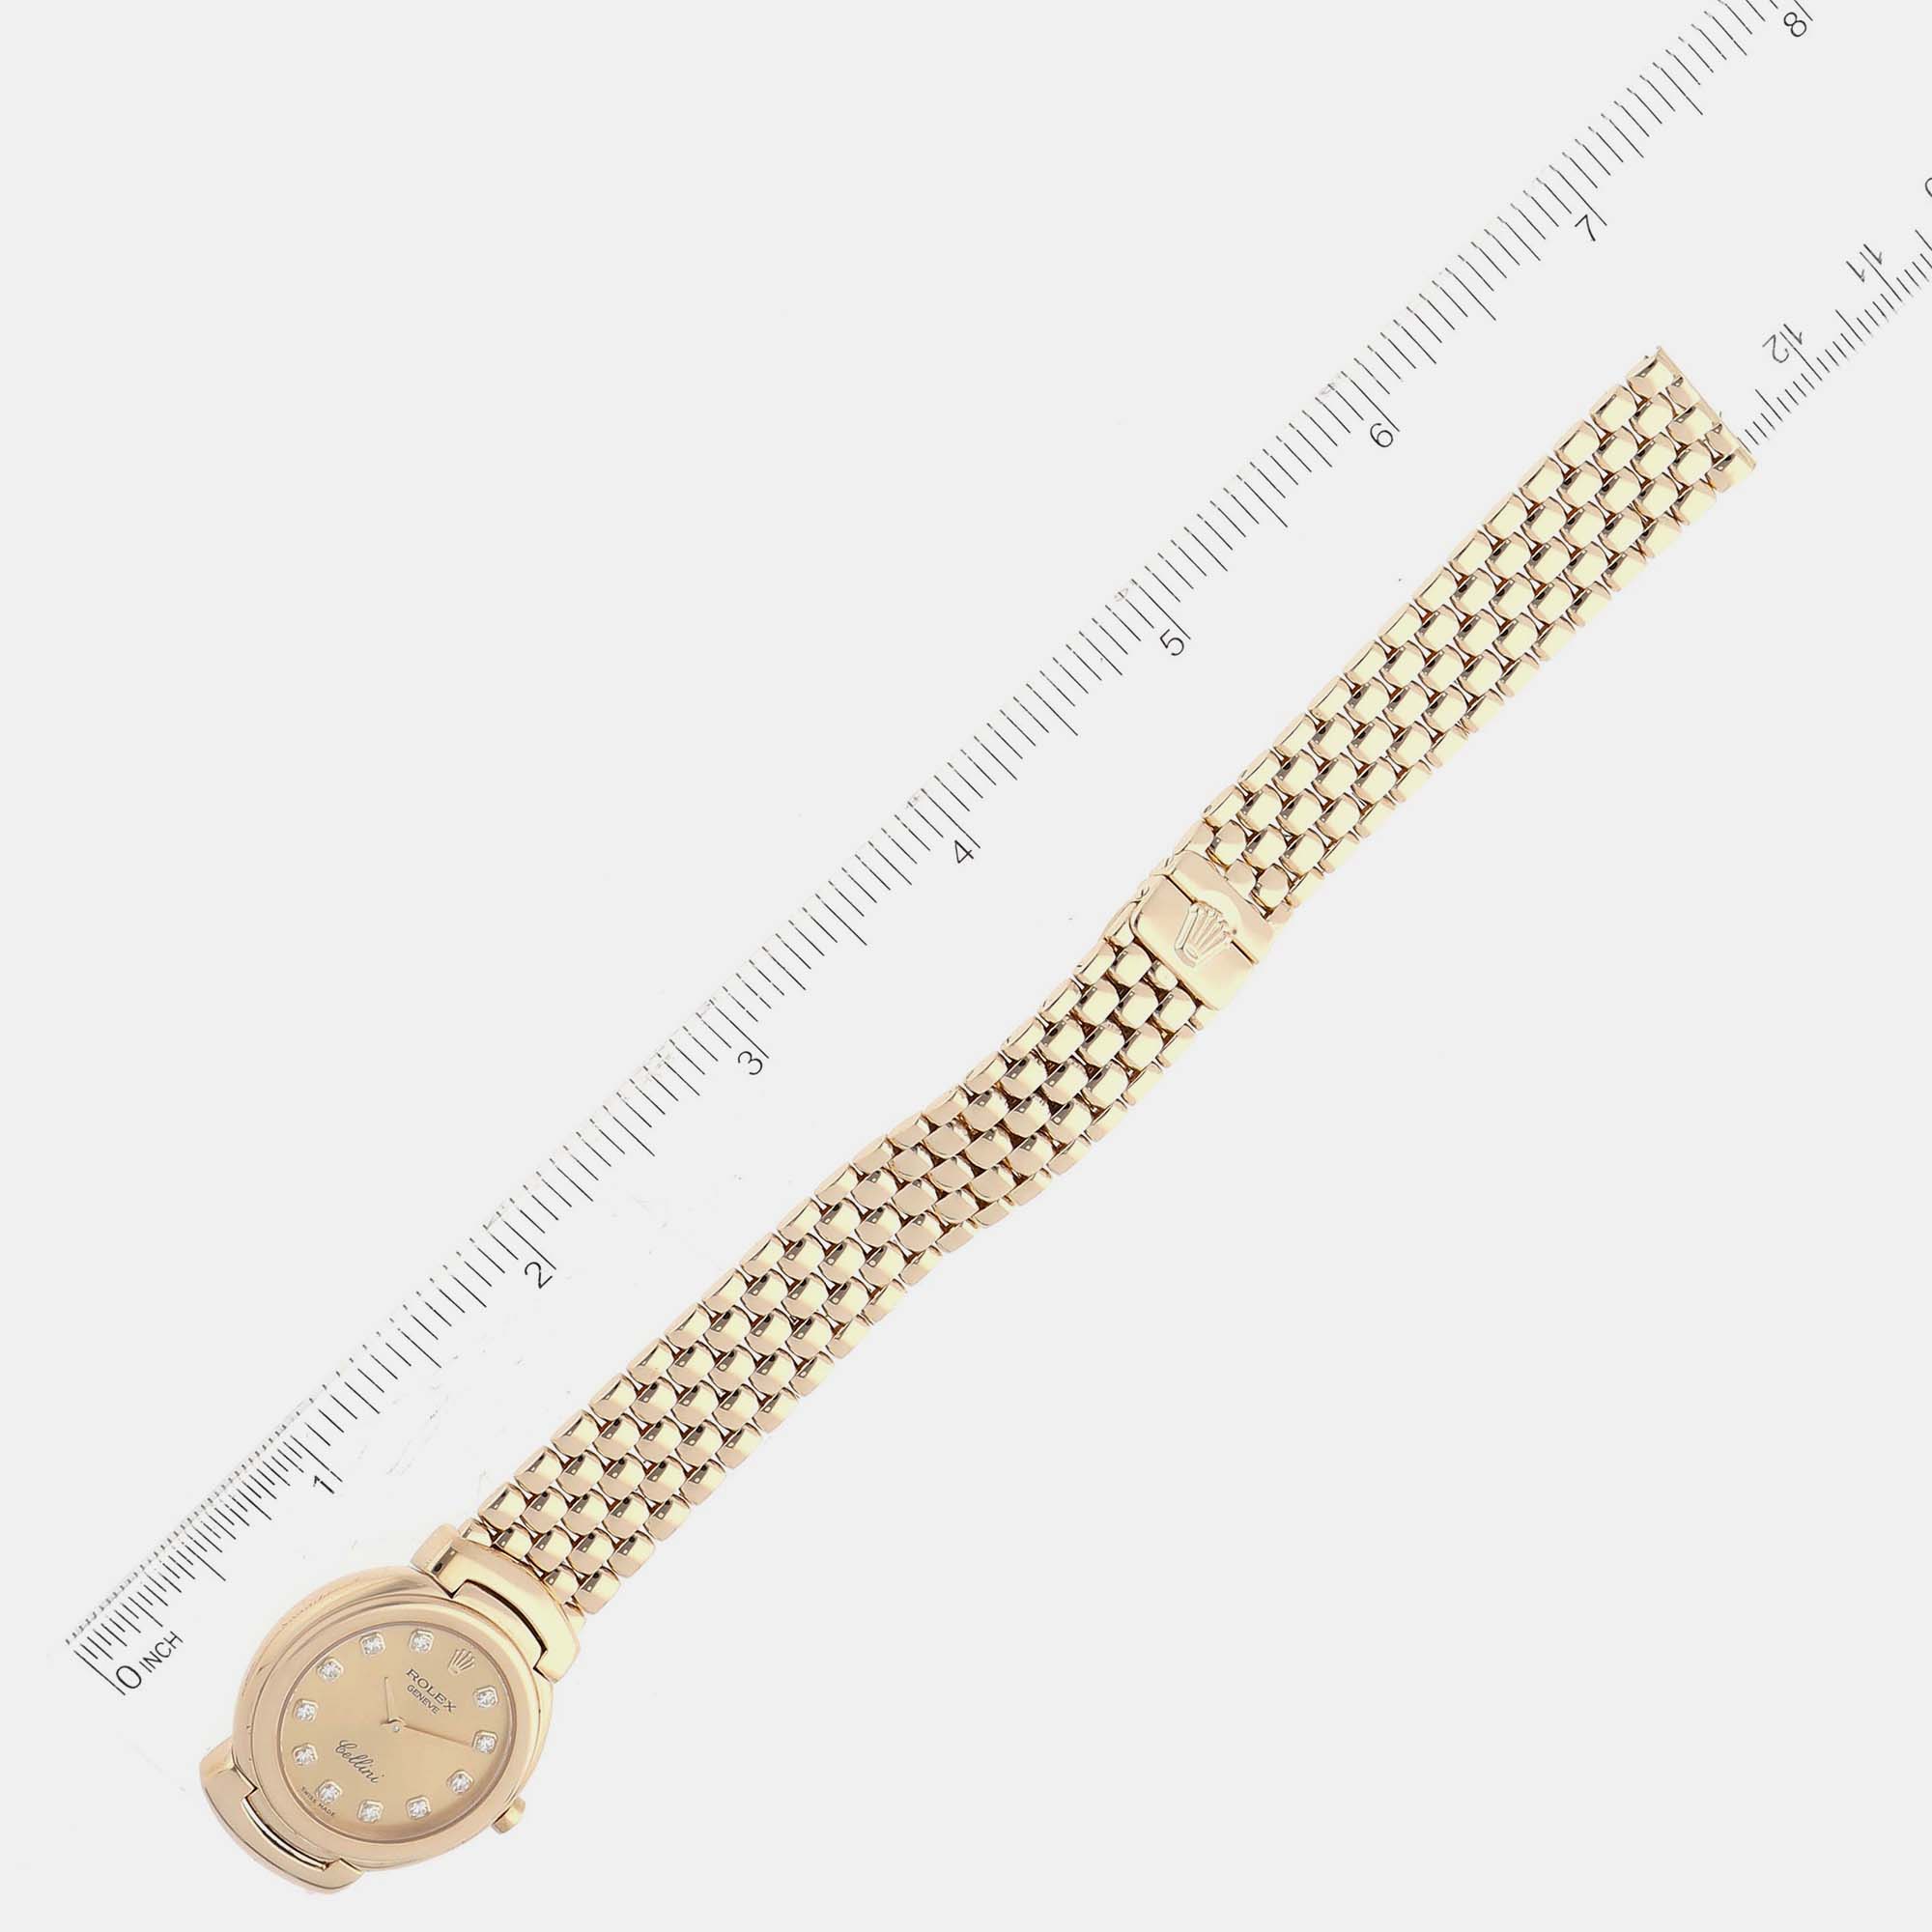 Rolex Cellini Yellow Gold Champagne Diamond Dial Ladies Watch 6621 26 Mm